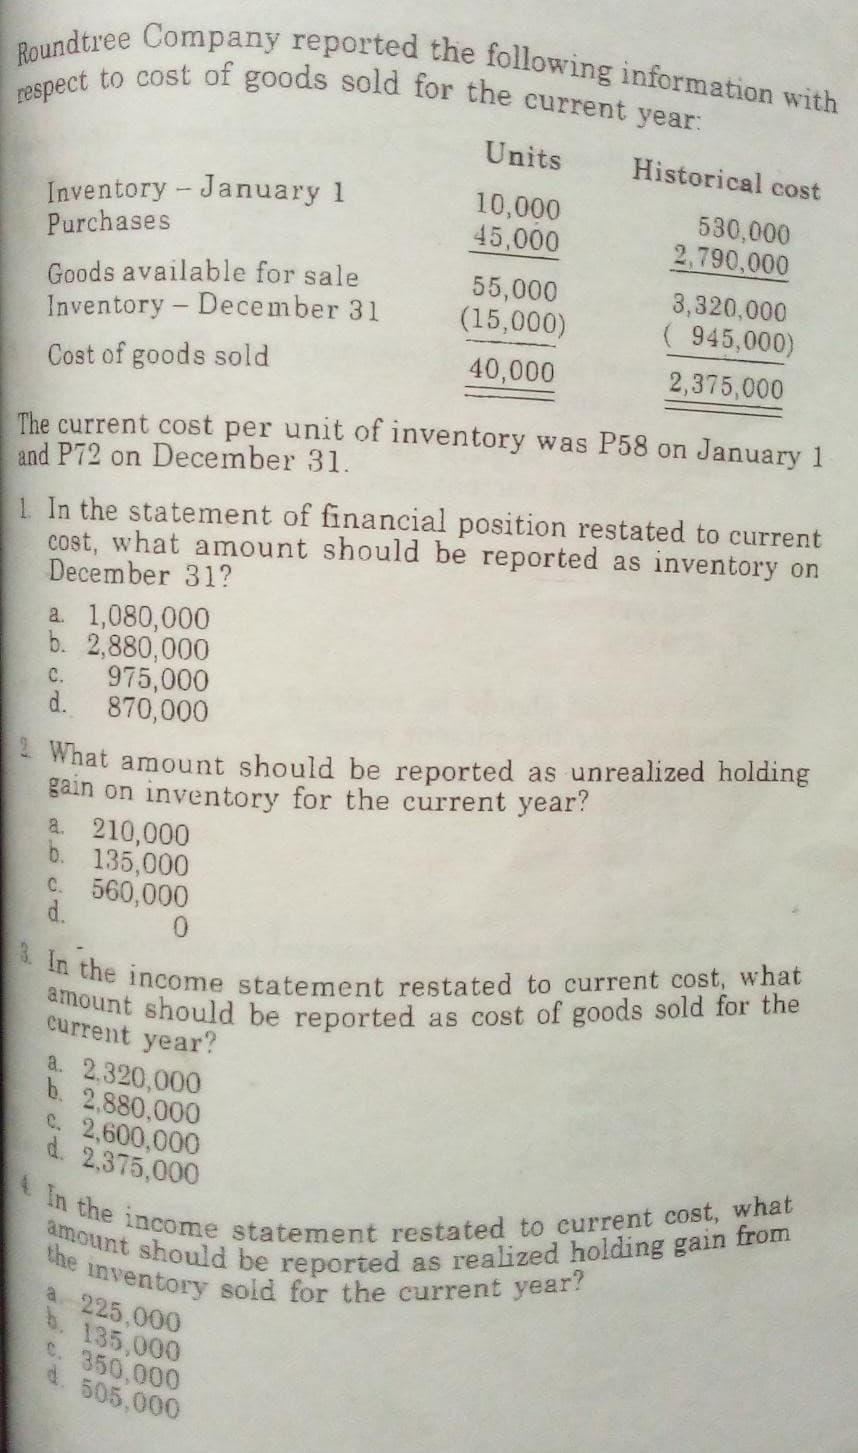 amount should be reported as realized holding gain from
A In the income statement restated to current cost, what
amount should be reported as cost of goods sold for the
respect to cost of goods sold for the current year:
the inventory sold for the current year?
Roundtree Company reported the following information with
3. In the income statement restated to current cost, what
Units
Historical cost
Inventory- January 1
Purchases
10,000
45,000
530,000
2,790,000
Goods available for sale
Inventory - December 31
55,000
(15,000)
3,320,000
( 945,000)
40,000
2,375,000
Cost of goods sold
The current cost per unit of inventory was P58 on January 1
and P72 on December 31.
1 In the statement of financial position restated to current
cost, what amount should be reported as inventory on
December 31?
a. 1,080,000
b. 2,880,000
975,000
C.
d. 870,000
4 What amount should be reported as unrealized holding
gain on inventory for the current year?
a. 210,000
b. 135,000
C. 560,000
d.
current year?
a. 2,320,000
b. 2,880,000
C. 2,600,000
d.
2,375,000
a 225,000
b. 135,000
C. 350,000
d. 505,000
